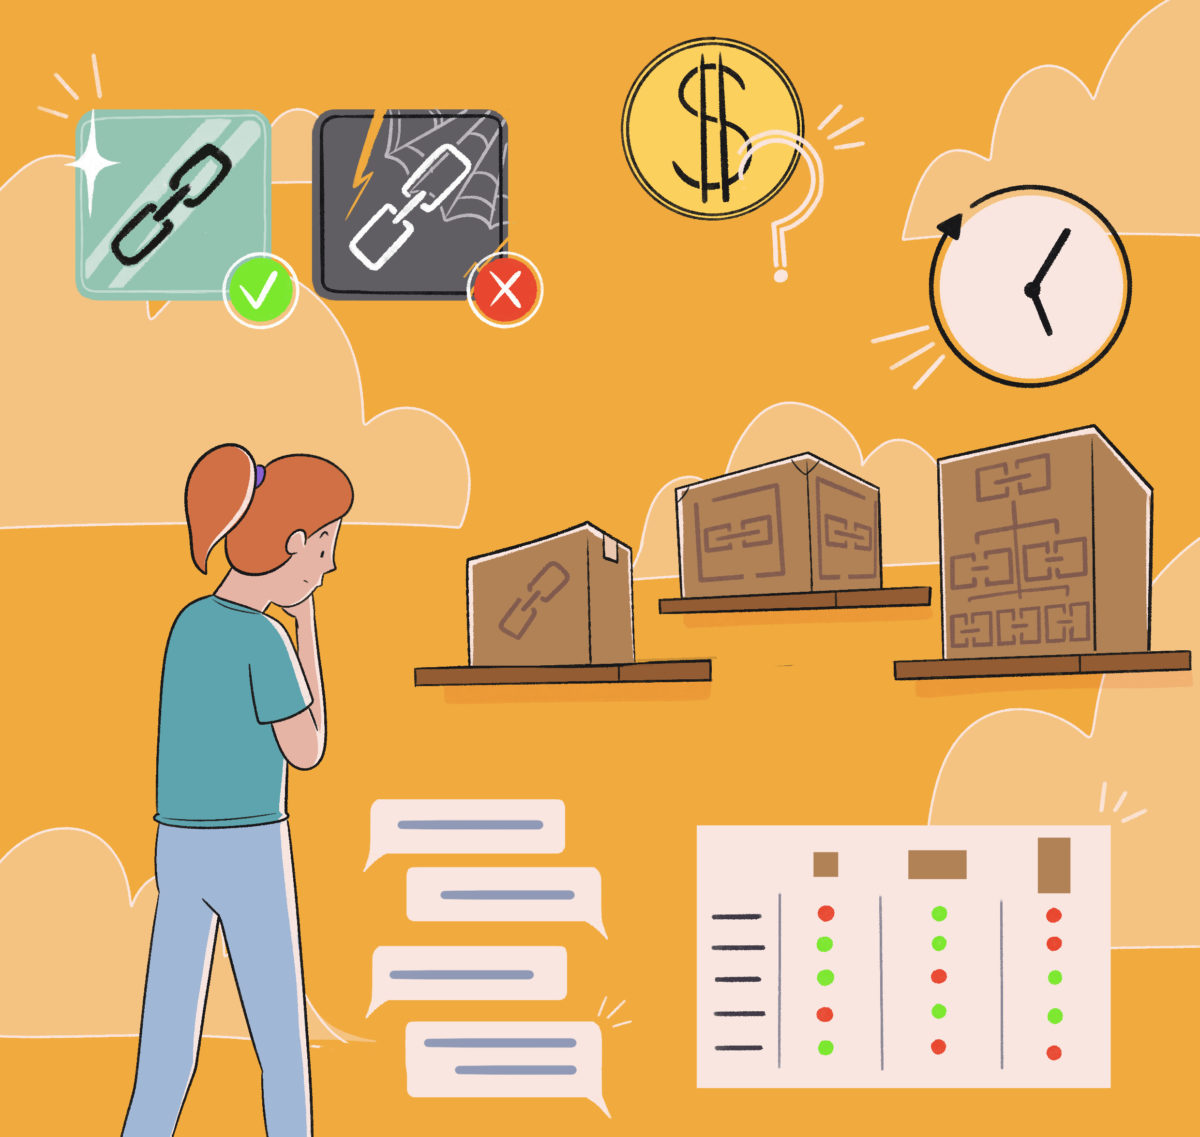 Illustration of a person contemplating different choices represented by symbols such as a checklist, a maze, a clock, money, and a document with review marks.